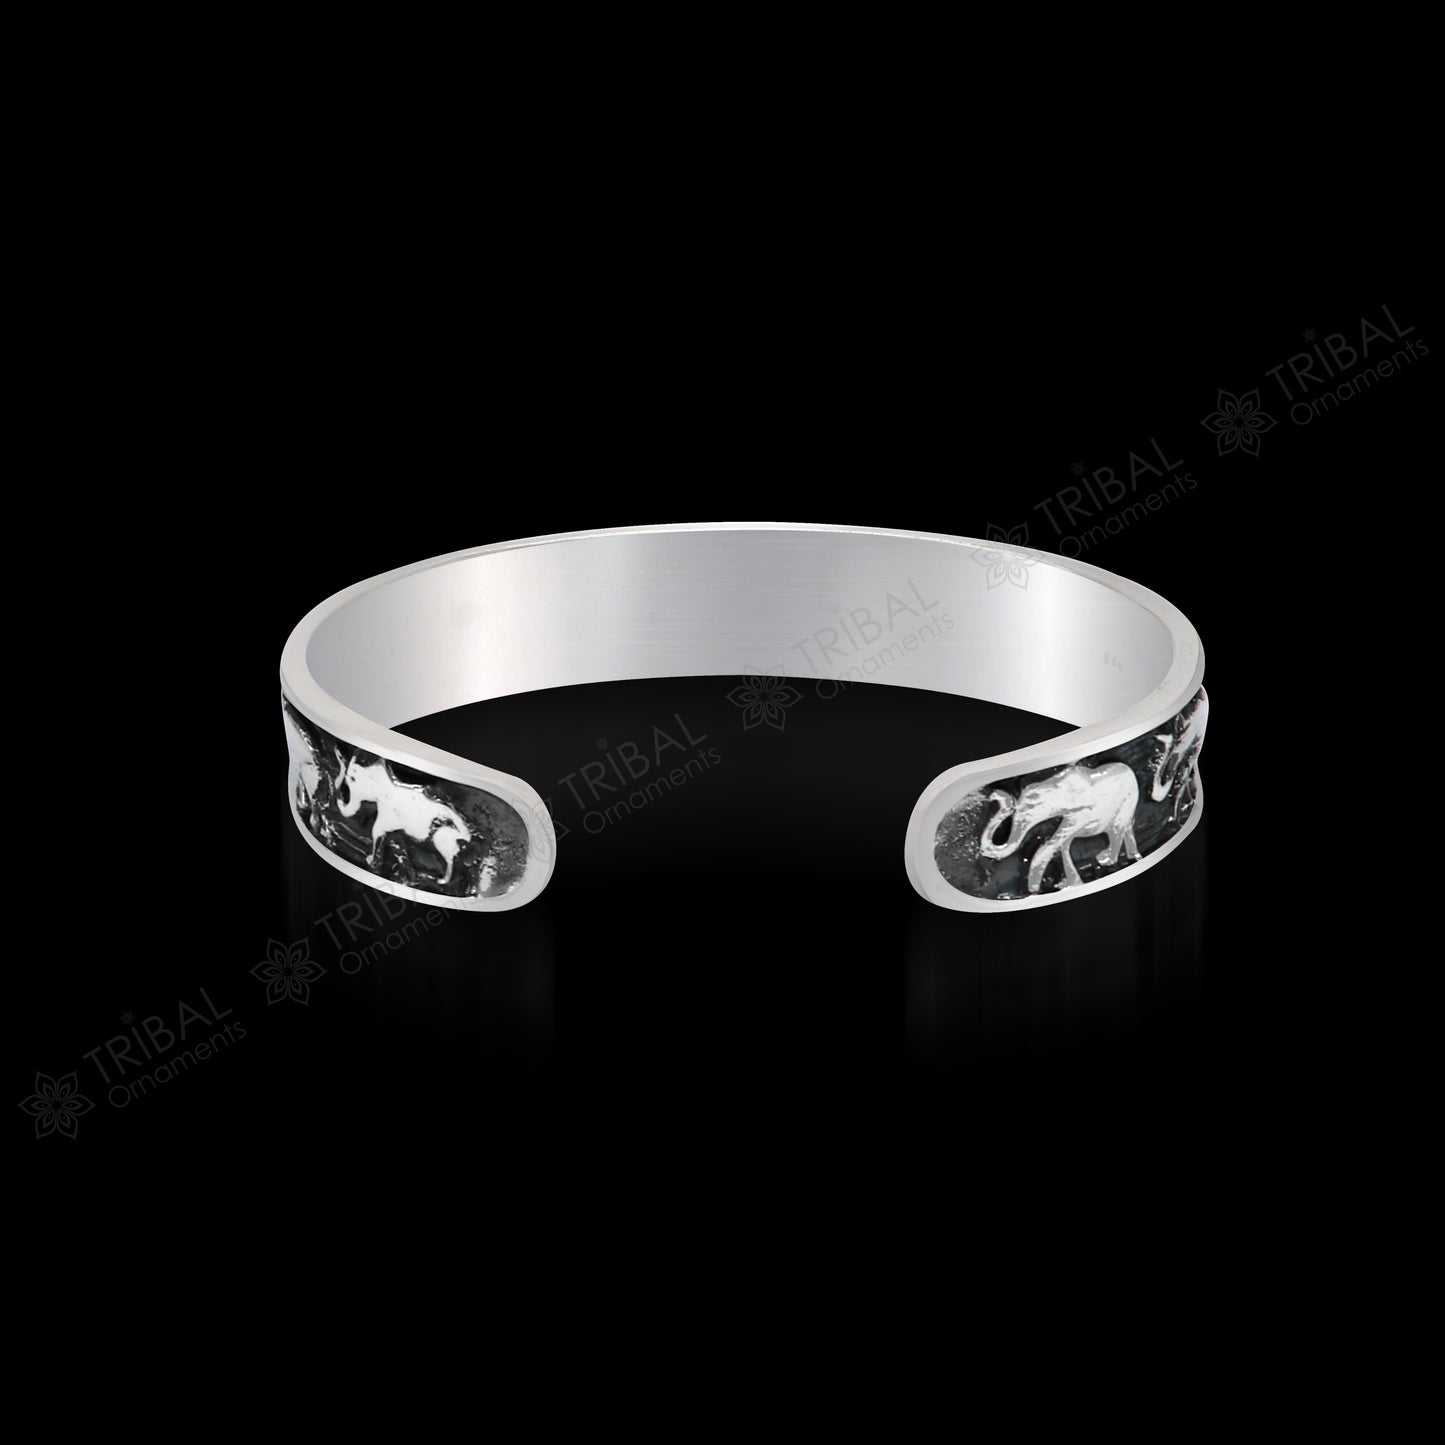 925 sterling silver unique style handcrafted adjustable elephant design cuff bangle bracelet, unisex gifting ethnic tribal jewelry nsk367